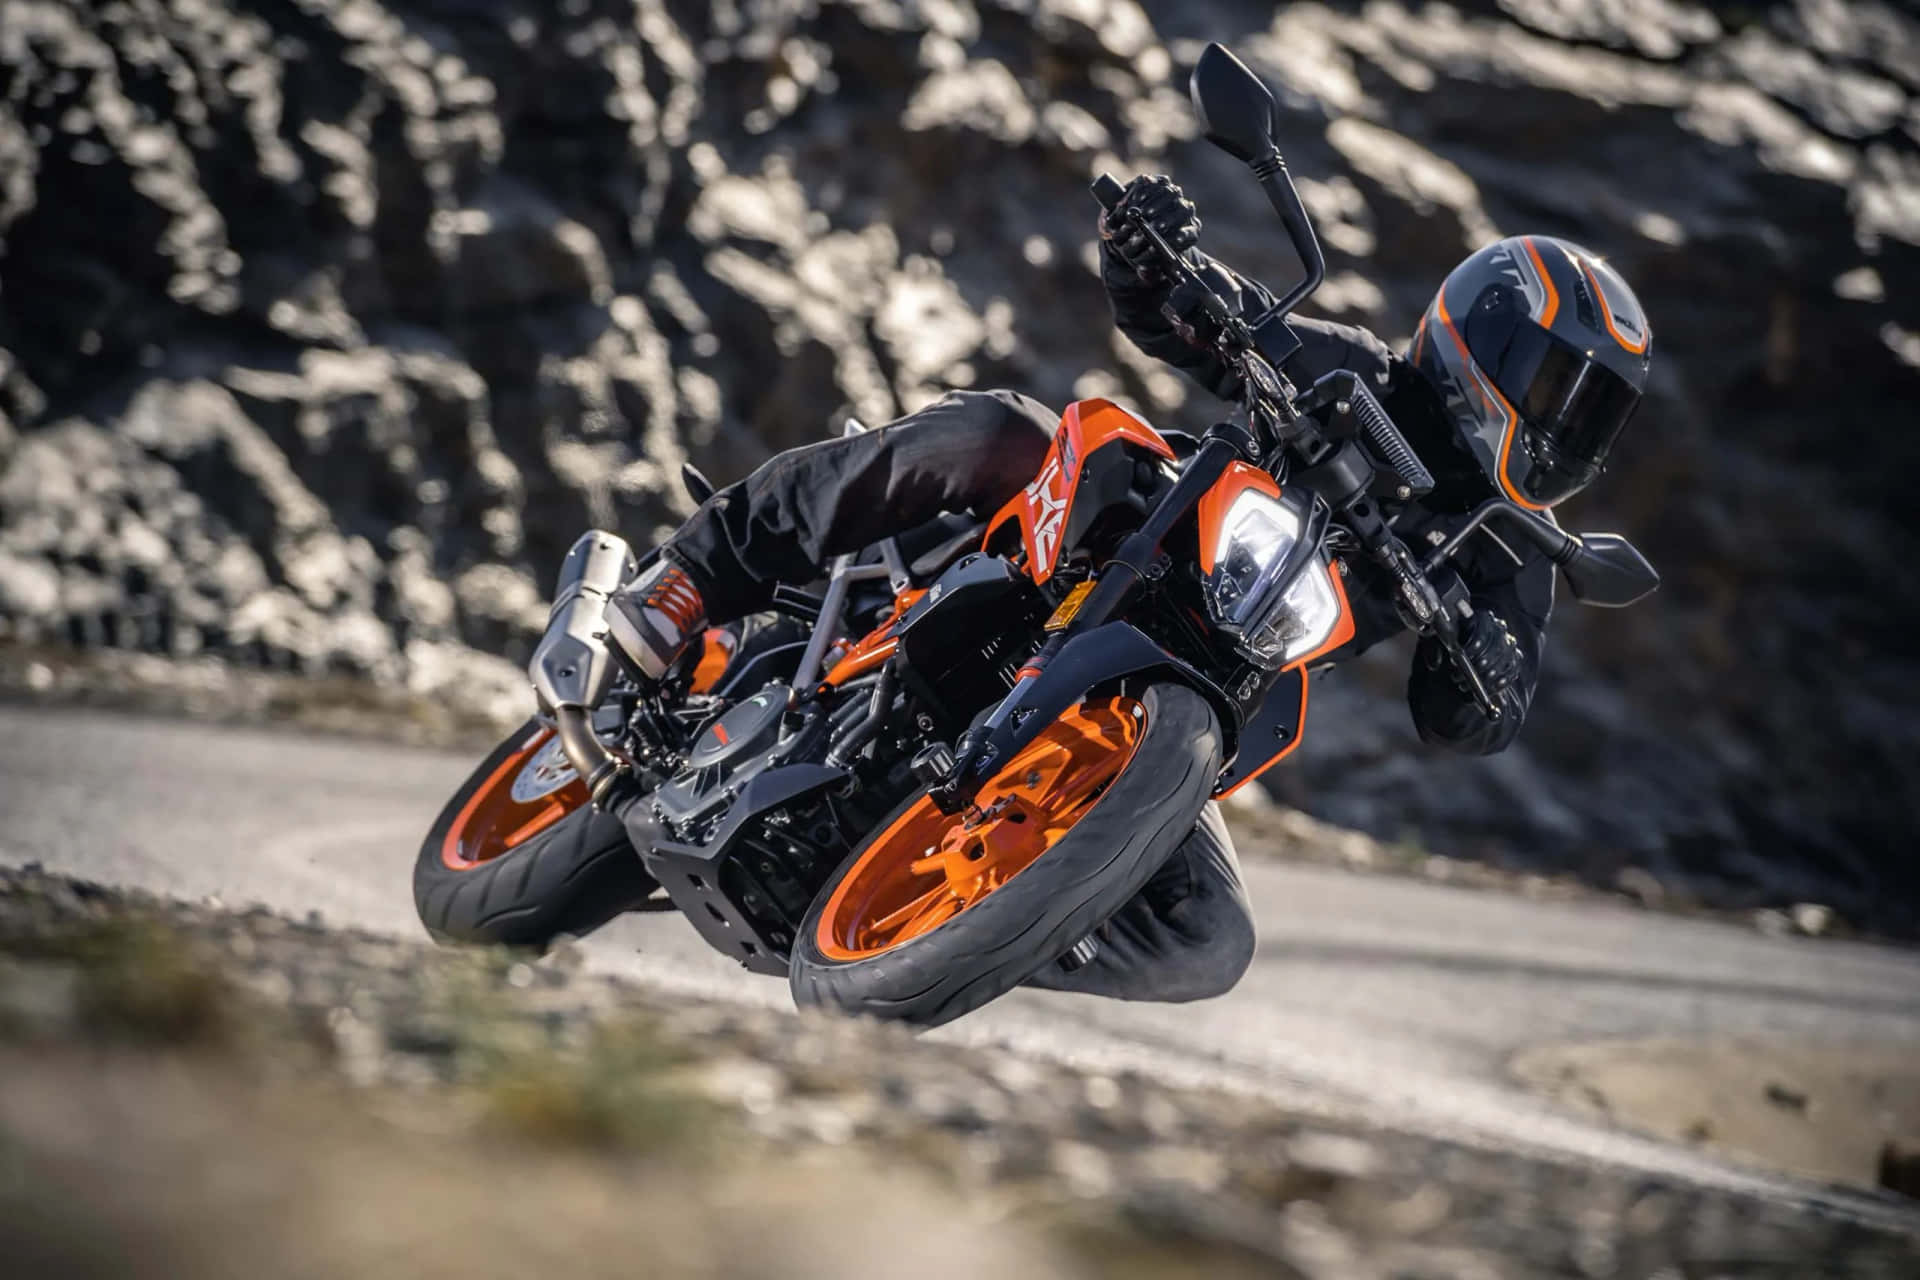 Feel the thrills pulsing through your veins aboard the KTM Duke 390.